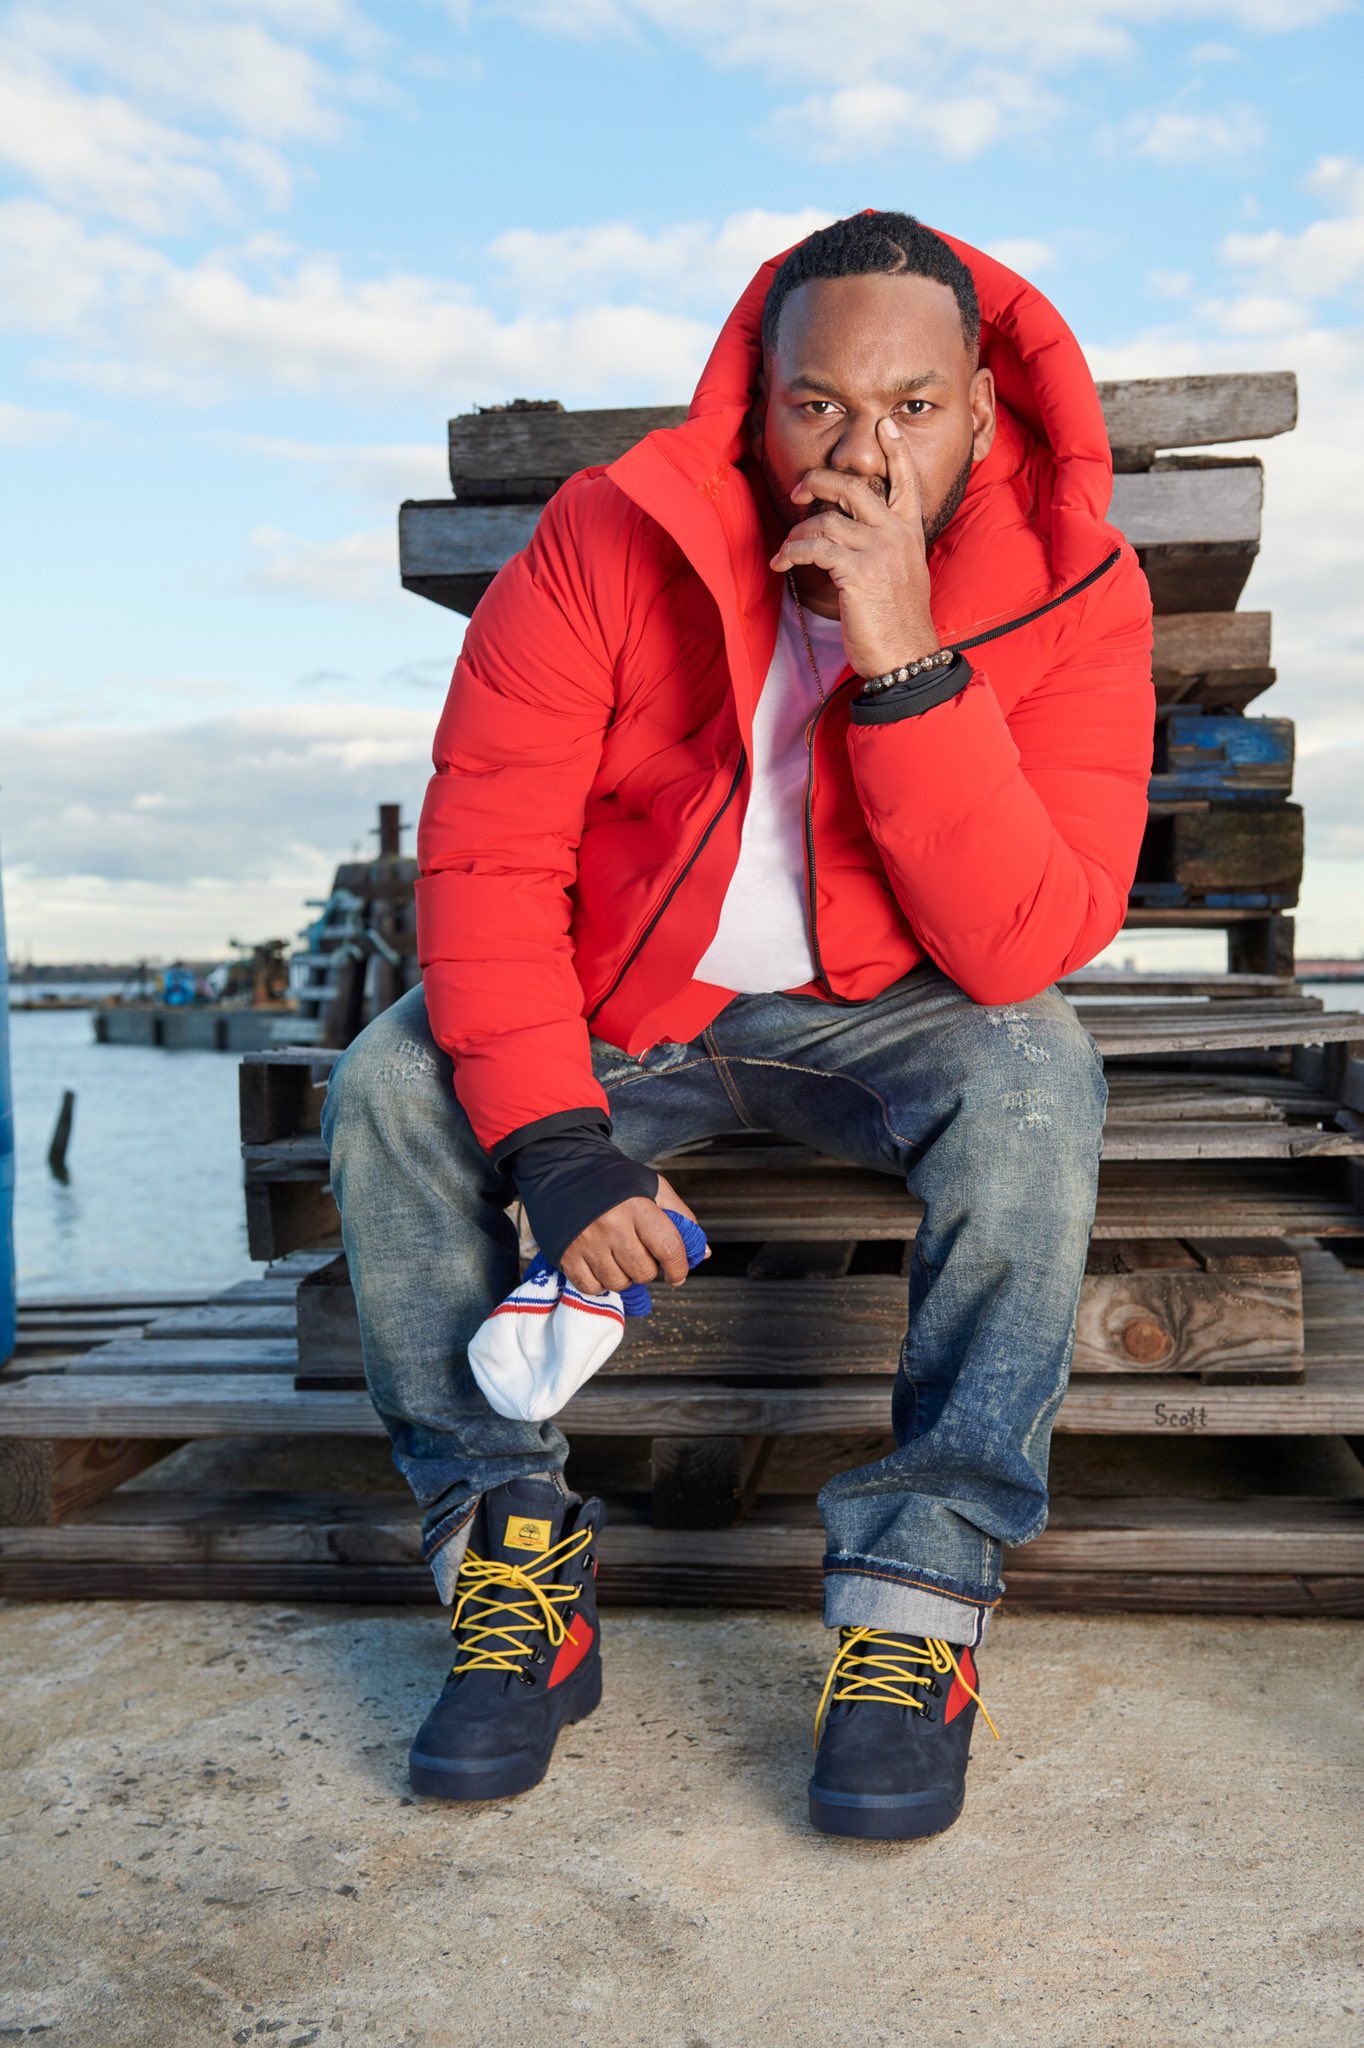 Emborracharse Solicitud Teseo Jimmy Jazz on Twitter: "The Jimmy Jazz exclusive Timberland 6” Premium  Field Boot presented by @Raekwon is now available in stores and  https://t.co/XtqazbKE42! Cop your pair now before they're gone  https://t.co/898PgTQpvE https://t.co/r1aYGJy5Rv" /